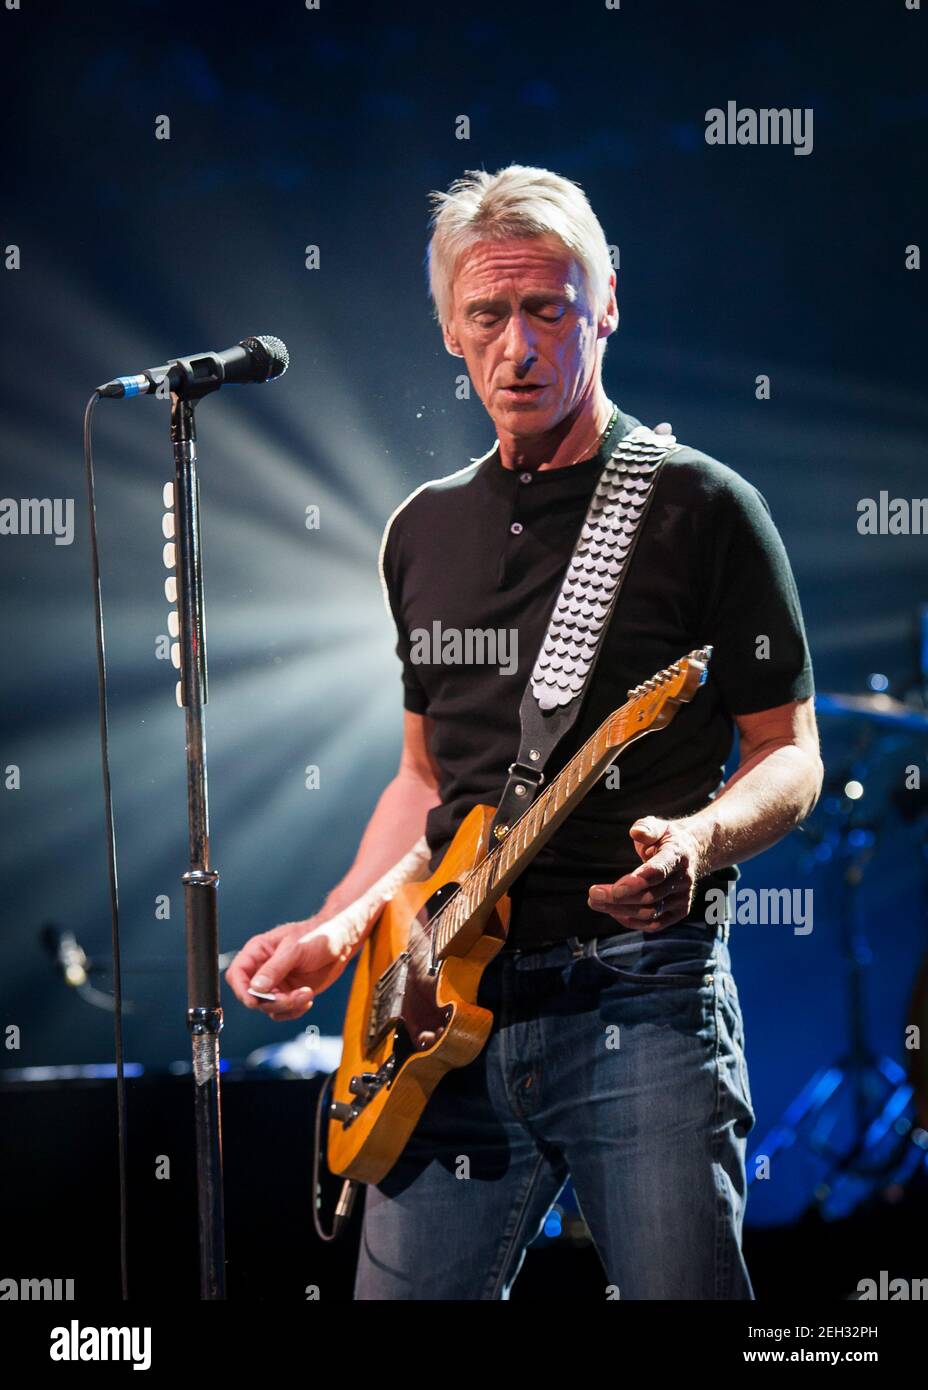 Paul Weller performs on stage for the Teenage Cancer Trust annual concert series at the Royal Albert Hall in London. Picture Date: Friday 31st March 2017. Photo credit should read: © DavidJensen Stock Photo